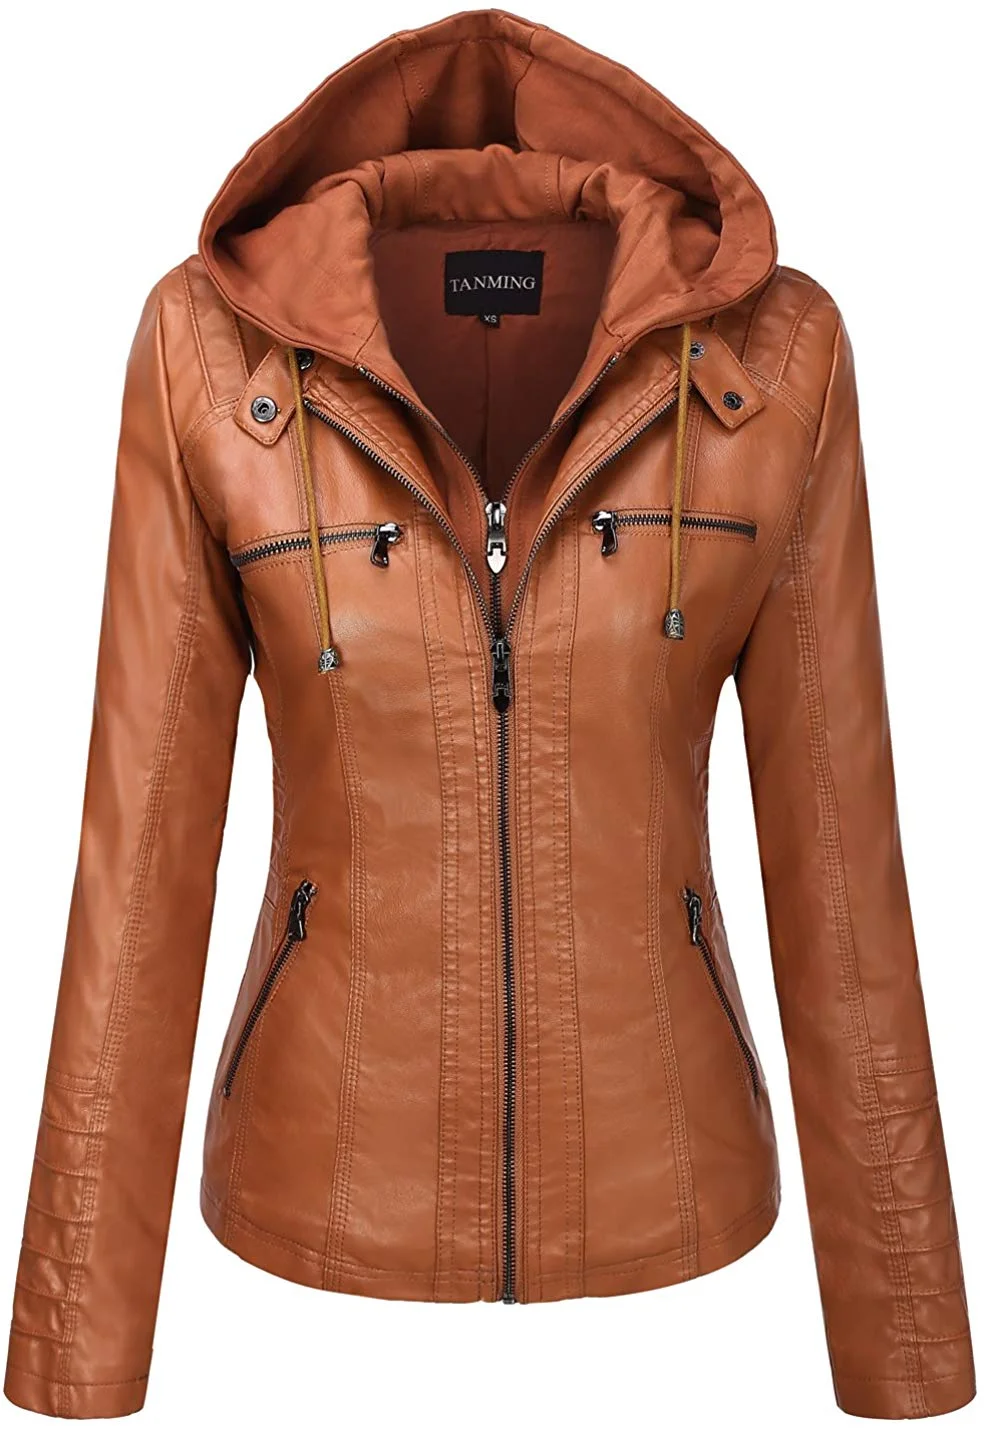 Women's Removable Hooded Faux Leather Jackets